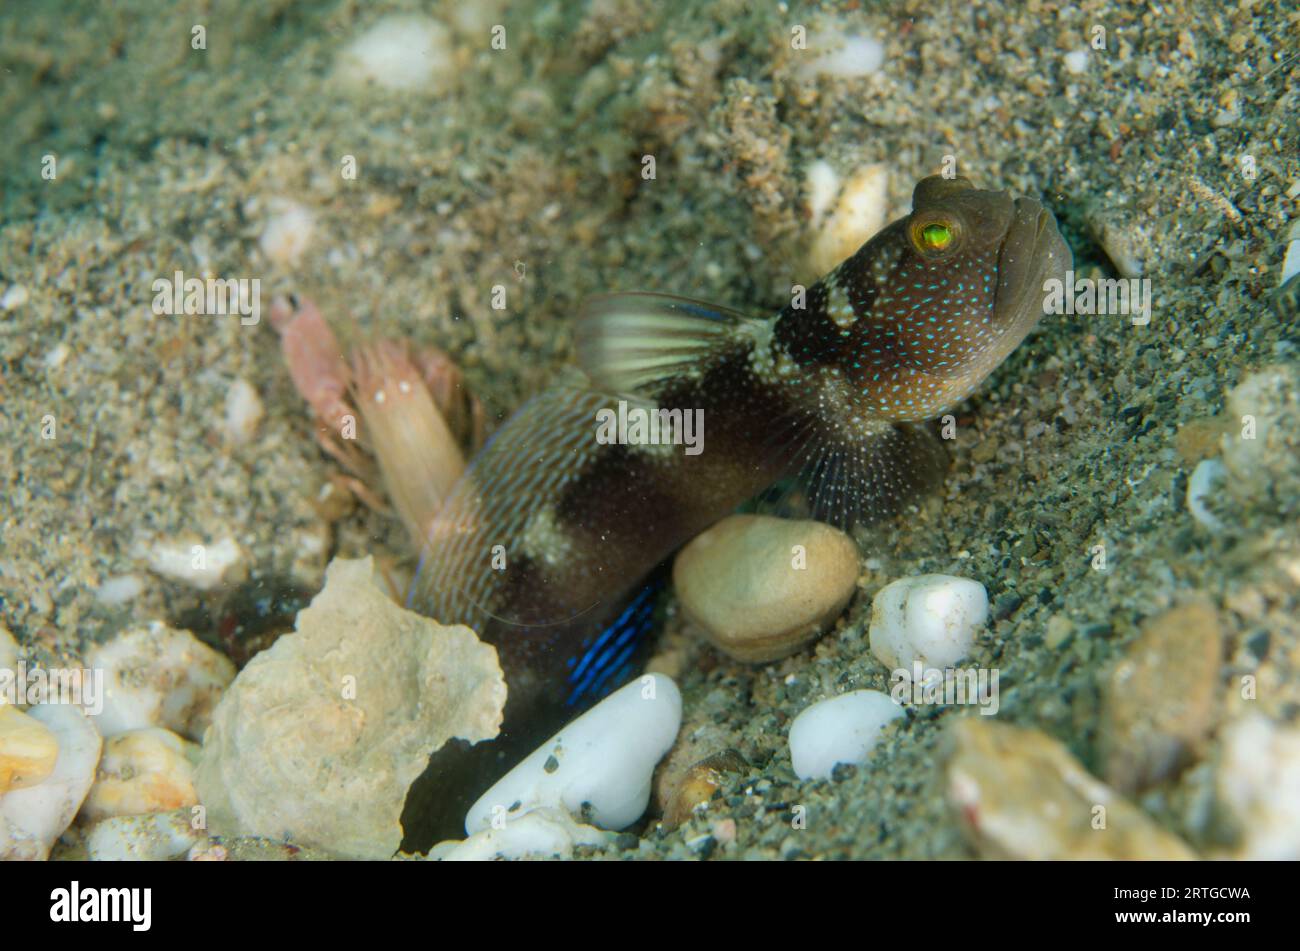 Variable Shrimpgoby, Cryptocentrus fasciatus, keeping watch while Fine-striped Snapping Shrimp, Alpheus ochrostriatus, digs shared hole on sand, Dili Stock Photo